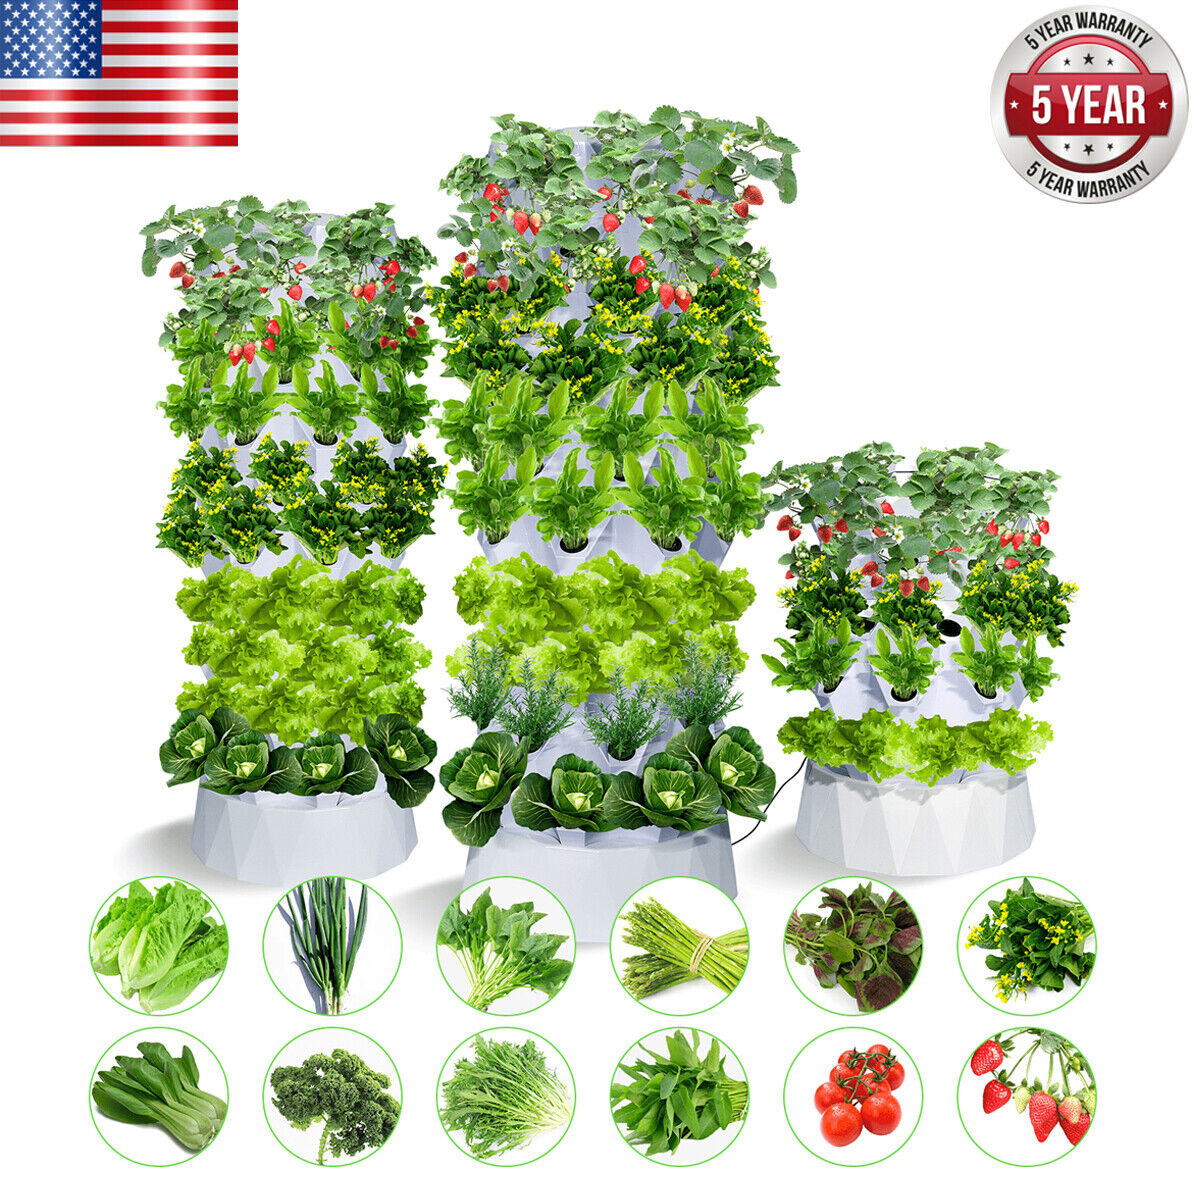 80 Pot Vertical Hydroponics Tower Systems Set Hydroponic Growing Kit Garden Home